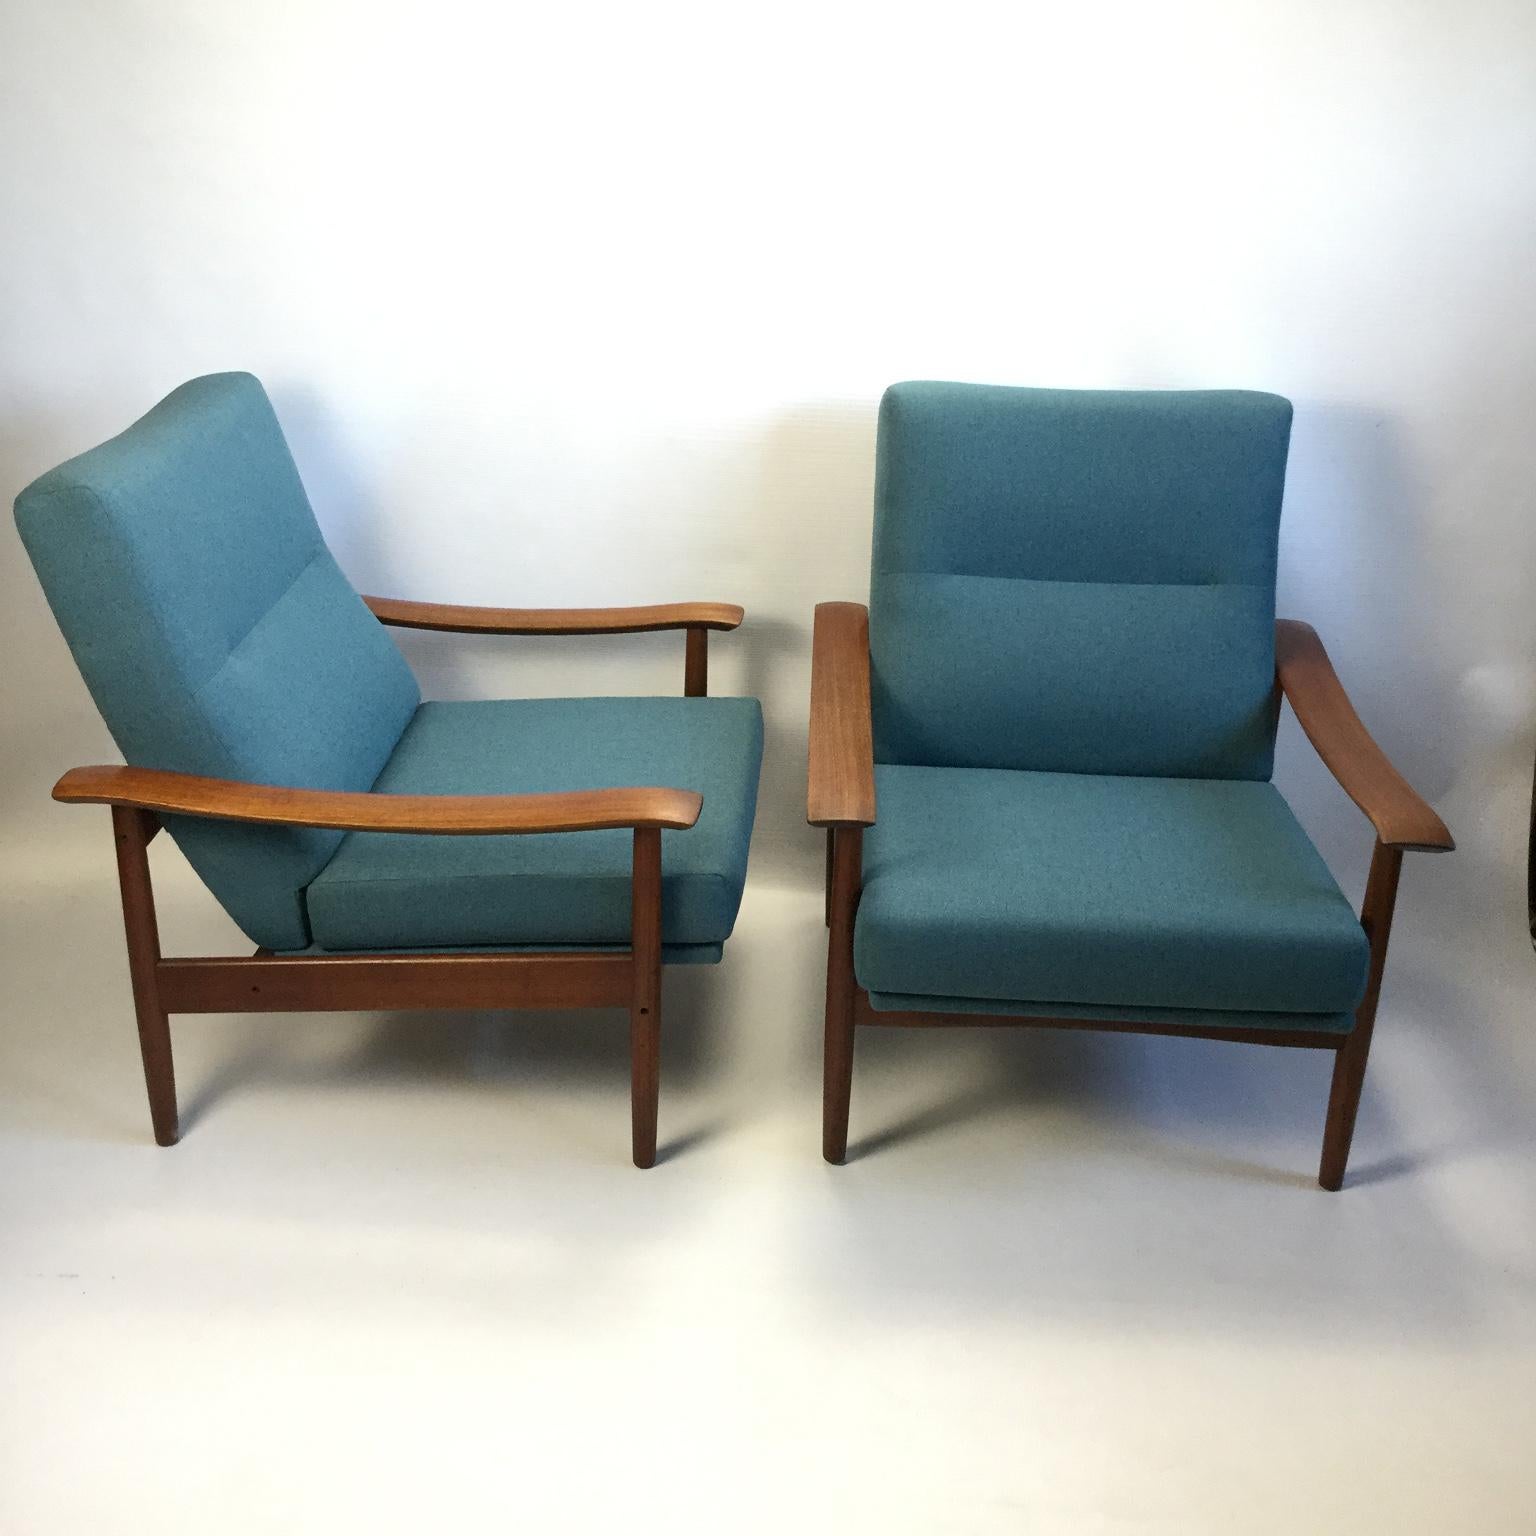 Pair of vintage solid teak armchairs by Gerard Guermonprez
Fully restored with new foams and new straps
Upholstered with blue/green mottled fabric.